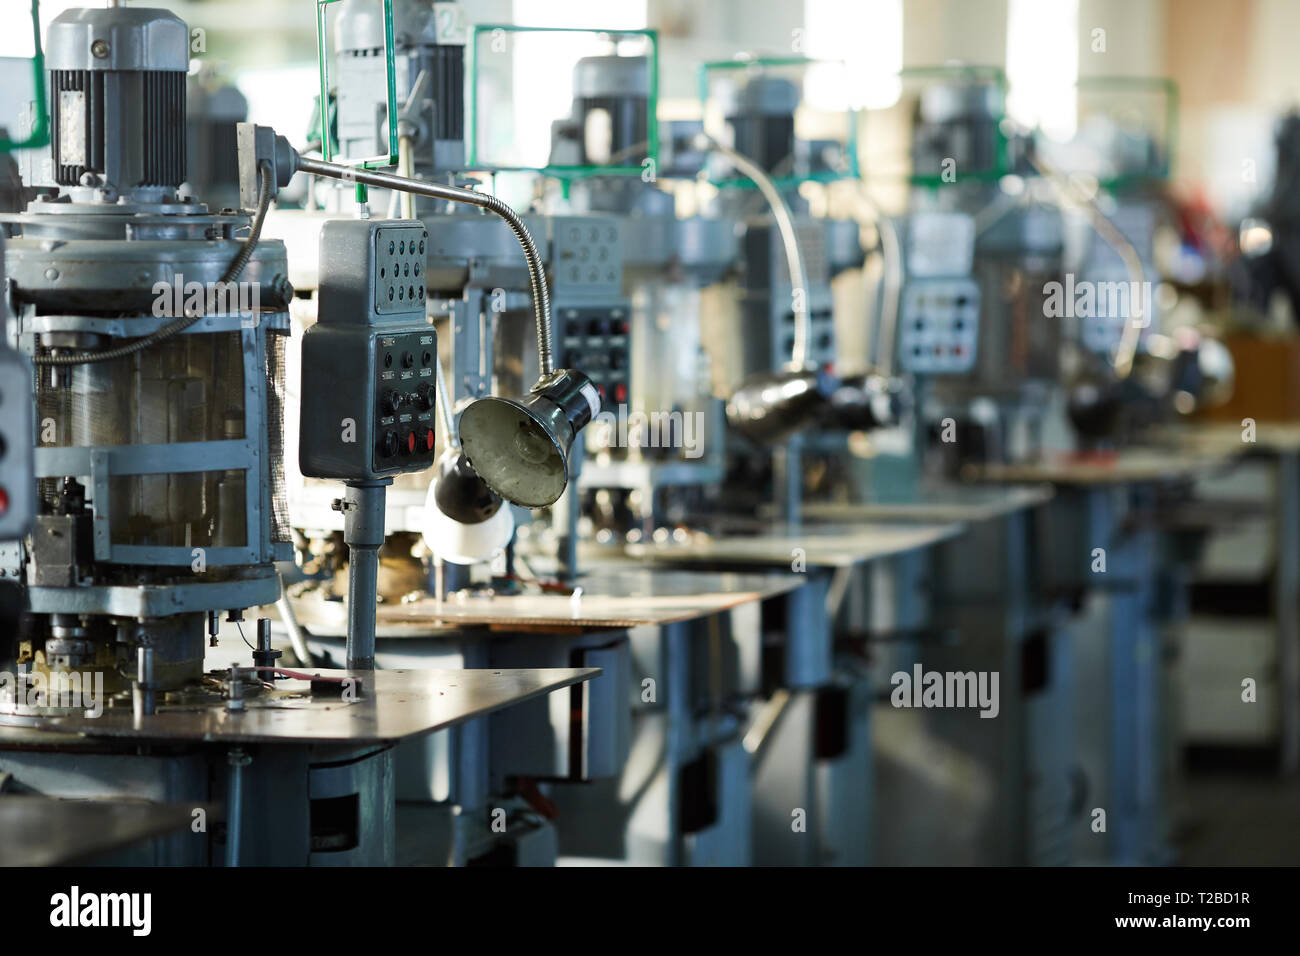 Industrial Machine Units in Row Stock Photo